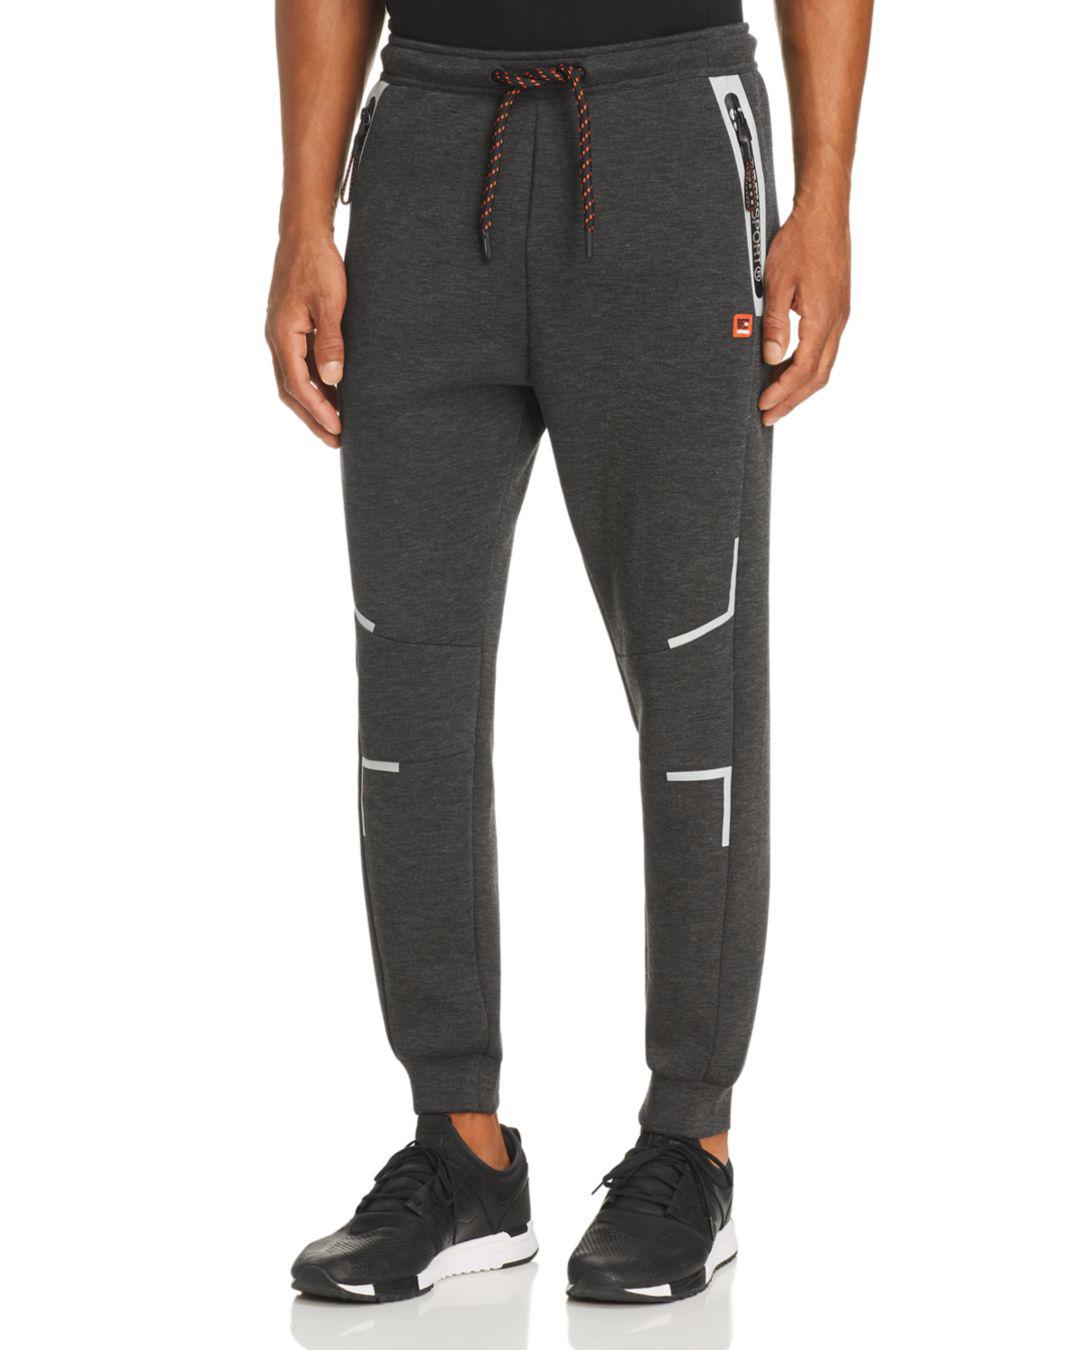 Superdry Gym Tech Stretch Jogger Pants in Carbon (Gray) for Men - Lyst